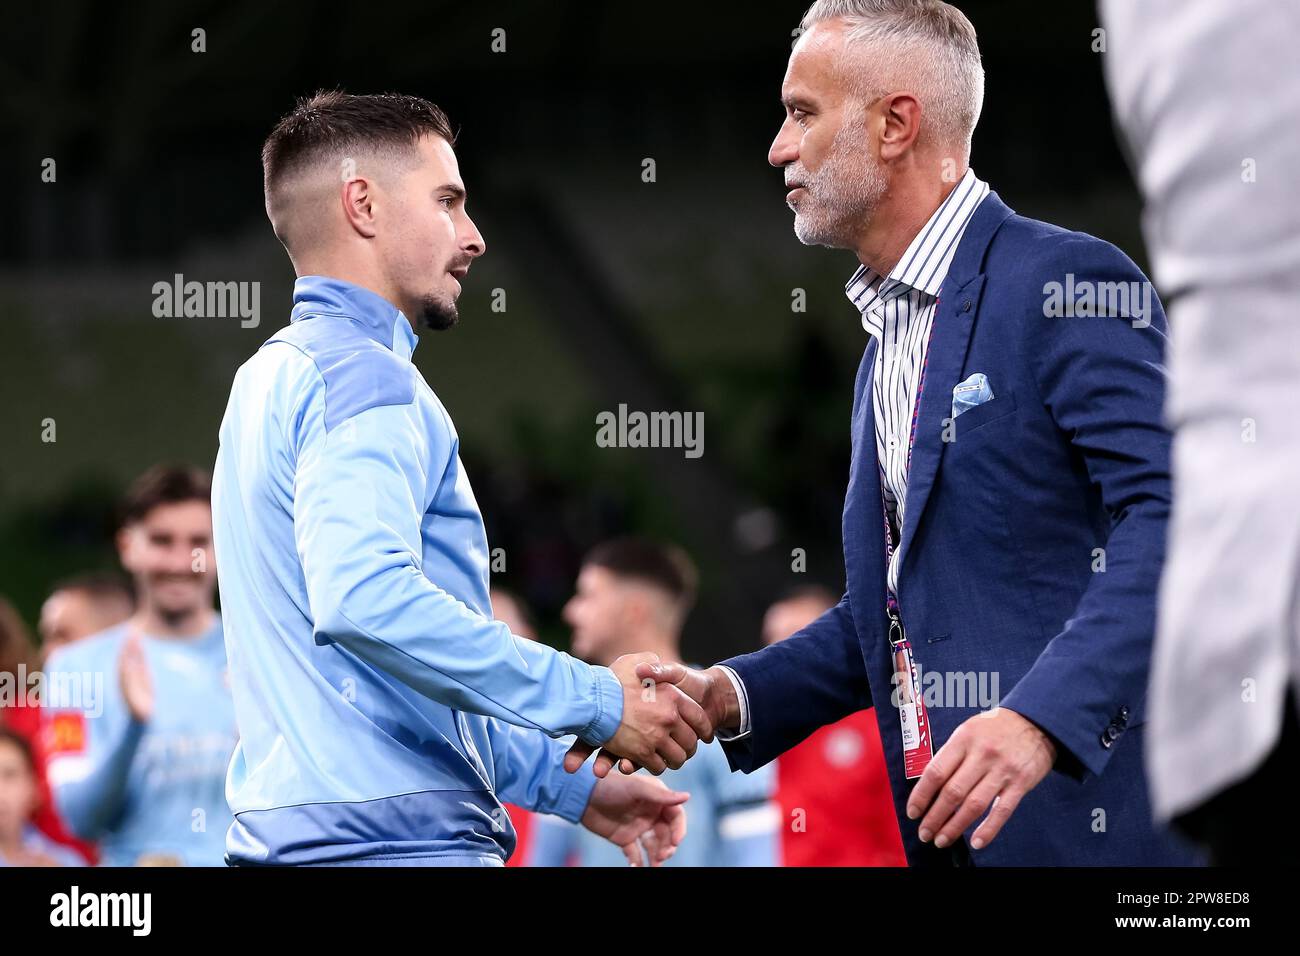 Melbourne, Australia, 28 April, 2023. Jamie Maclaren of Melbourne City FC during the A-League Men's football match between Melbourne City and Western Sydney Wanderers at AAMI Park on April 28, 2023 in Melbourne, Australia. Credit: Dave Hewison/Alamy Live News Stock Photo